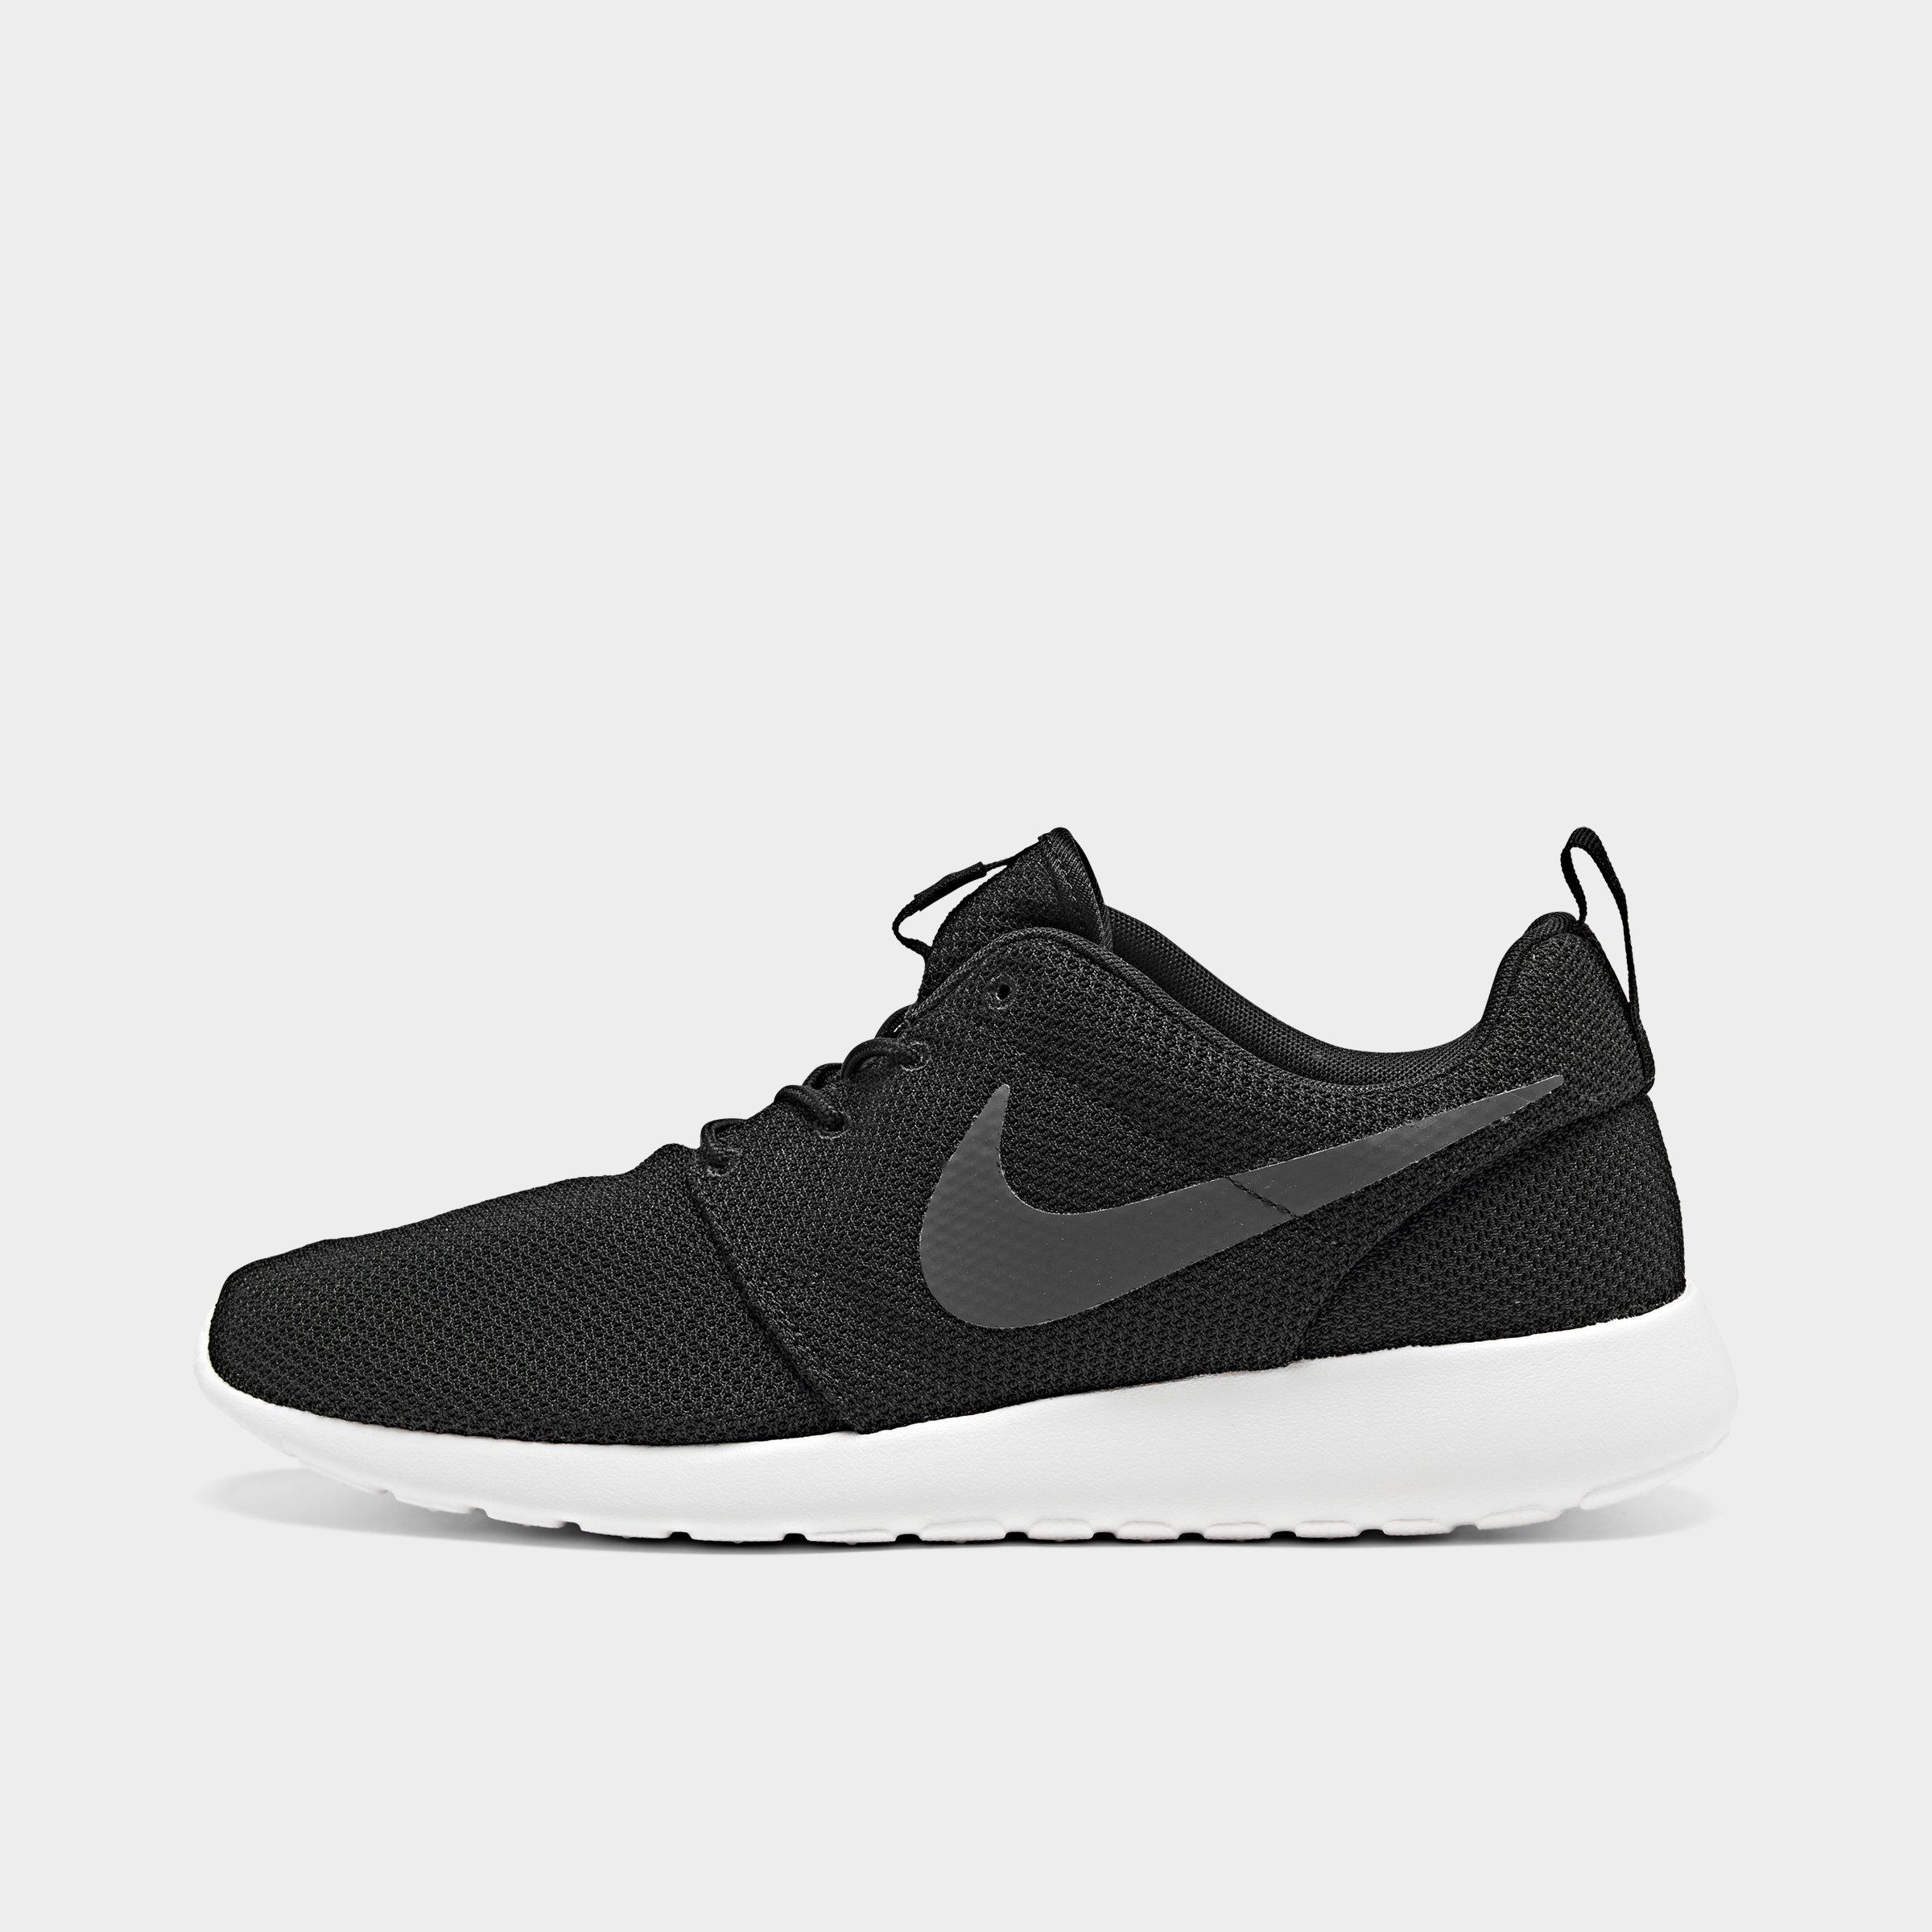 Men's Nike Roshe One Casual Shoes| JD Sports